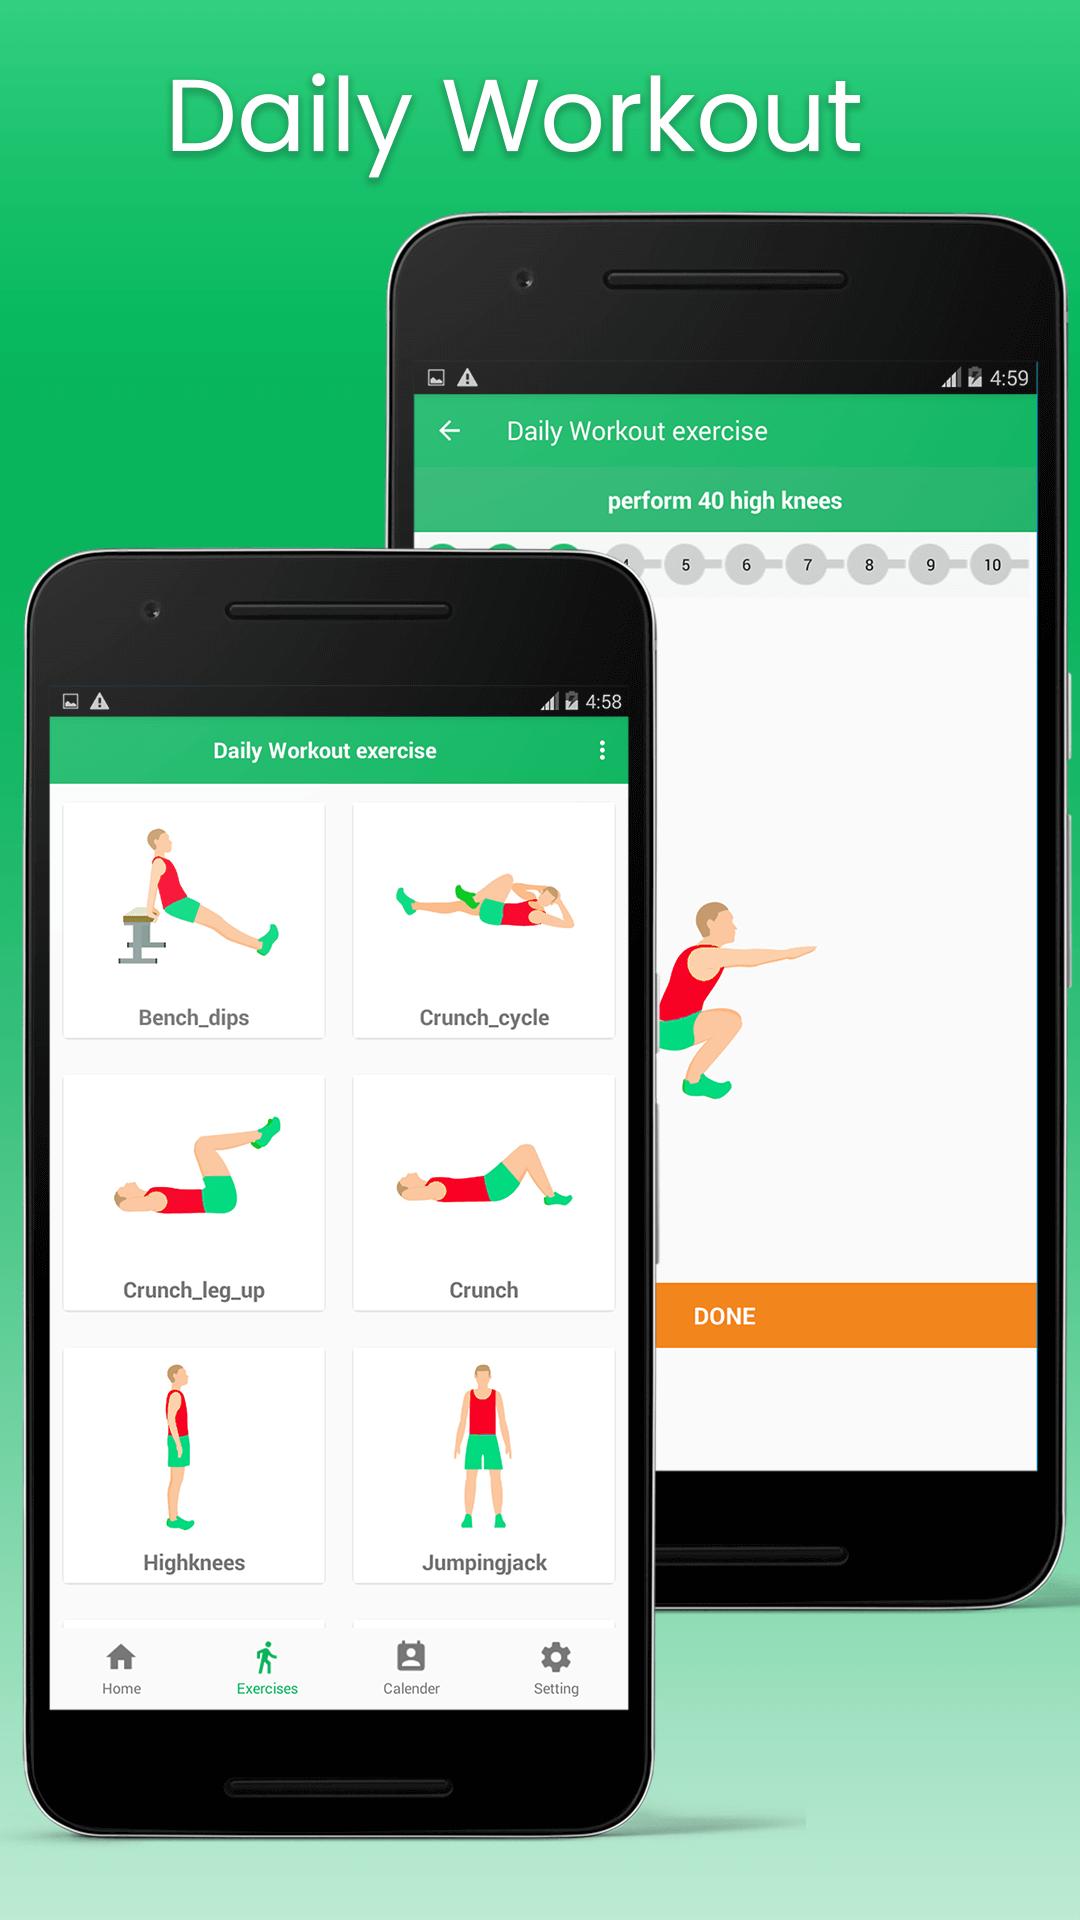 Daily Workout fitness app for Android - APK Download